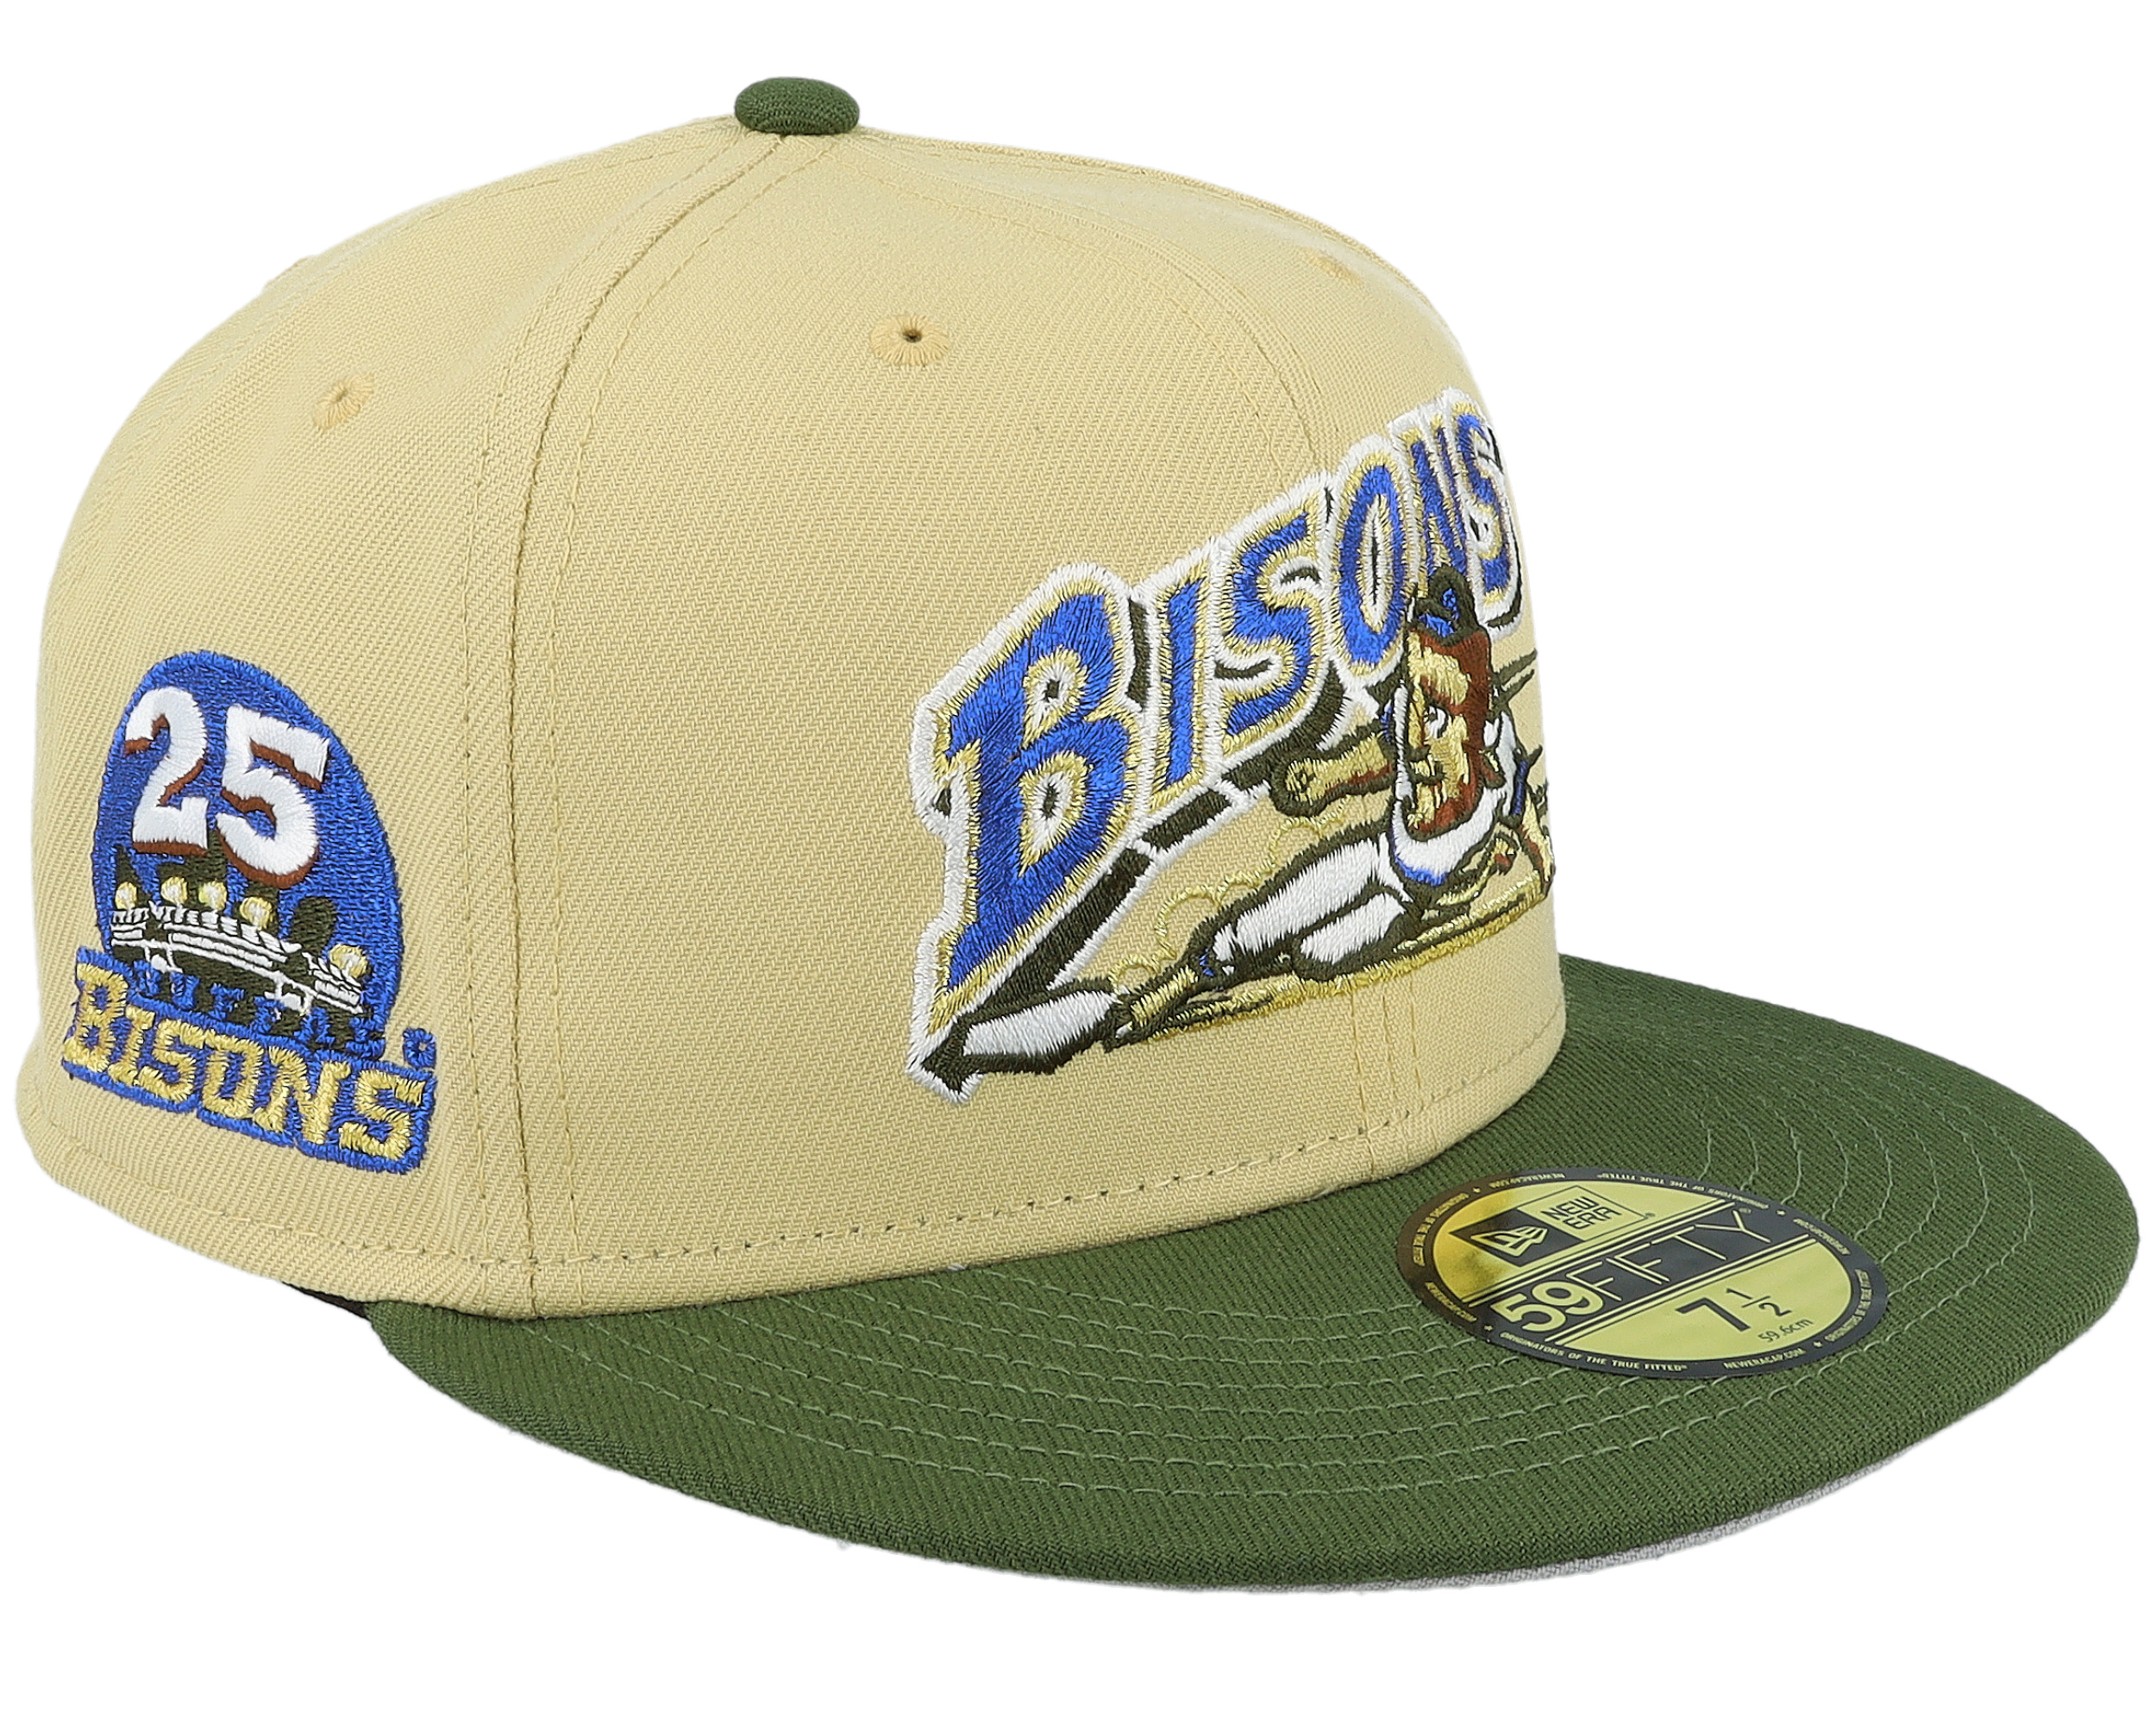 MiLB Landscape Buffalo Bisons 59FIFTY Beige/Rifle Fitted - New Era 